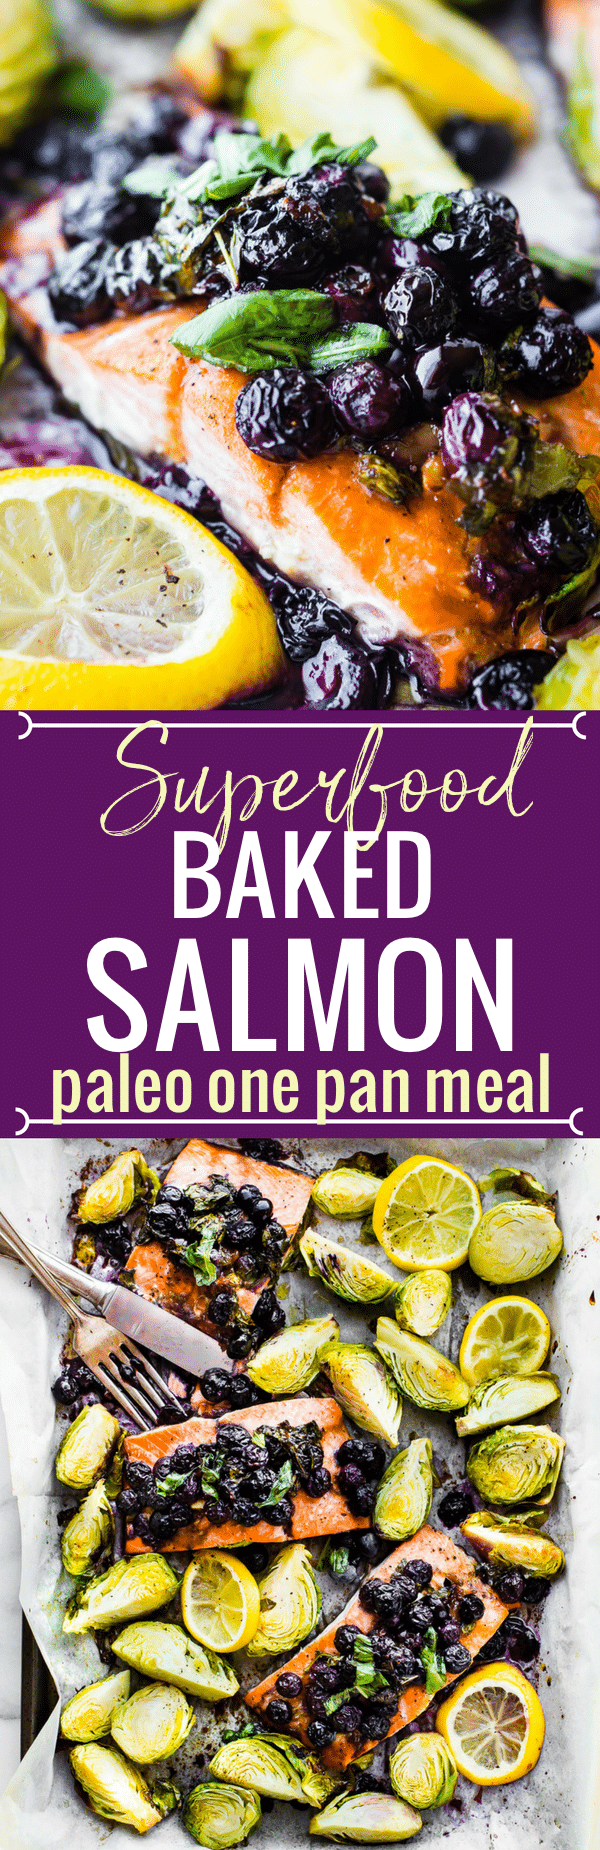 One pan Paleo SUPERFOOD Baked Salmon! This baked salmon recipe is ready in 20 minutes and packed full of nutrients. A nourishing, whole 30 friendly, flavorful meal! Salmon baked with a zippy basil blueberry balsamic topping and crispy Brüssel sprouts! Get your sheet pan ready for dinner! www.cottercrunch.com